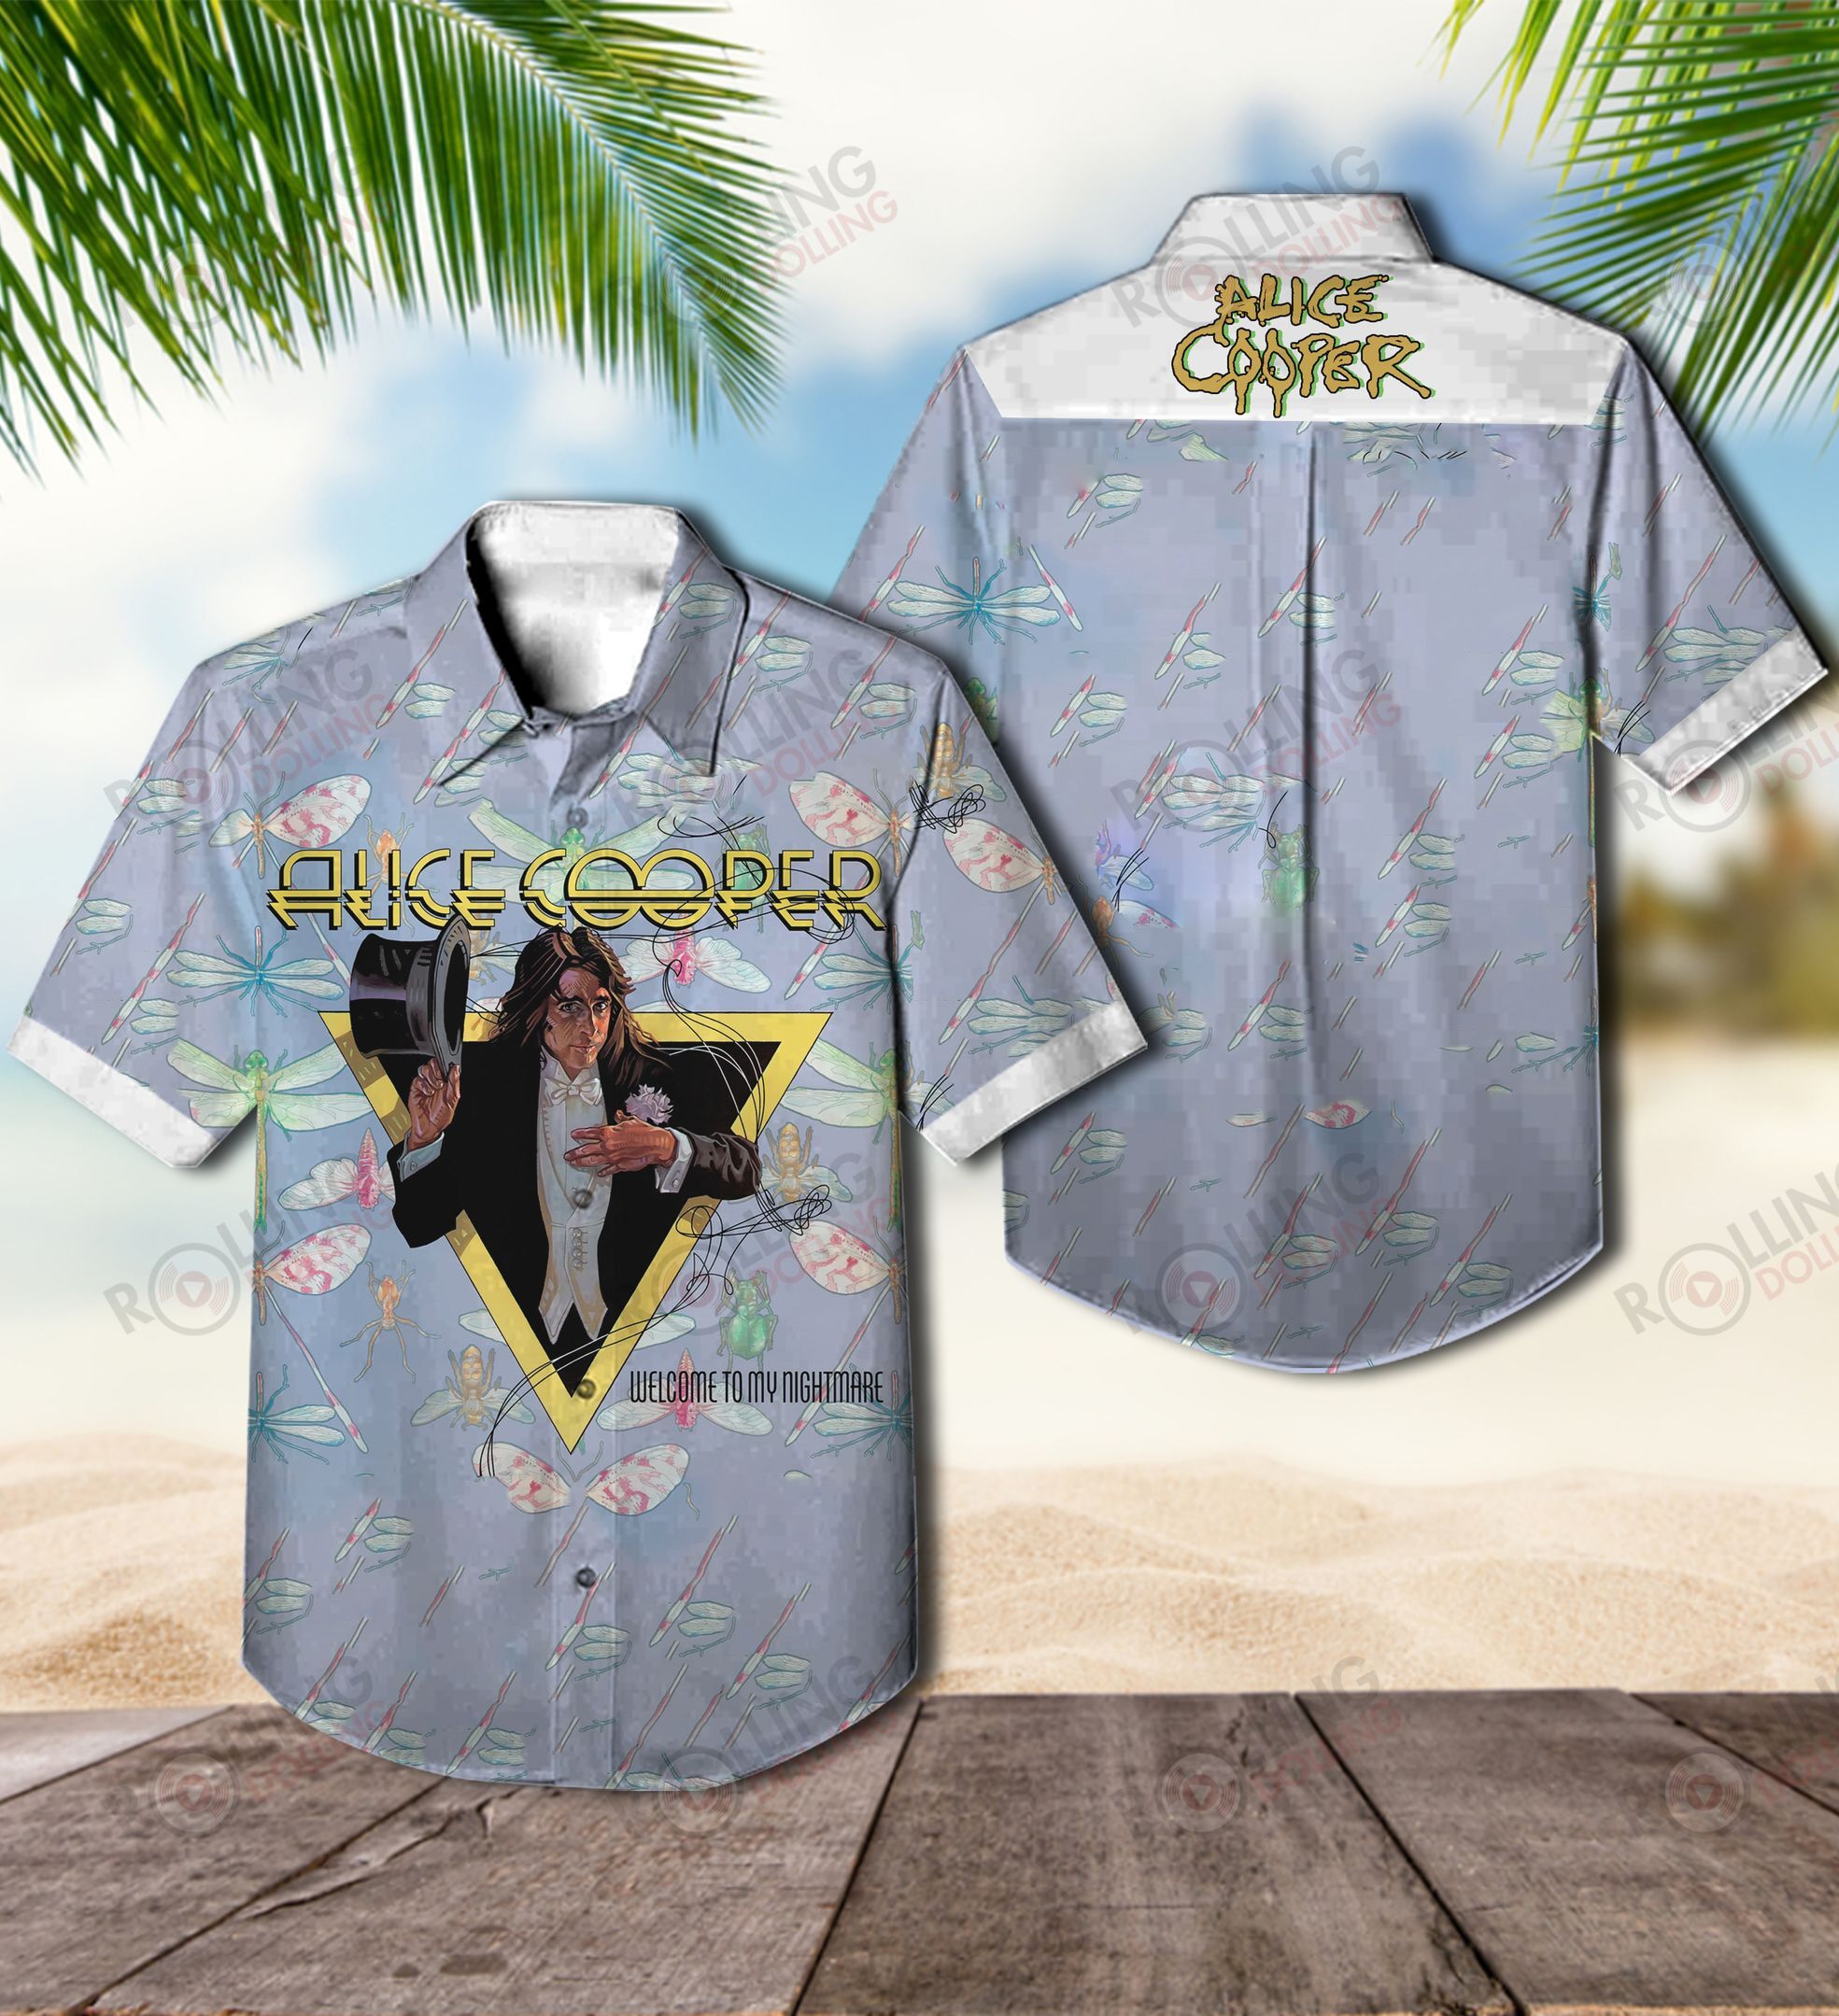 For summer, consider wearing This Amazing Hawaiian Shirt shirt in our store 30